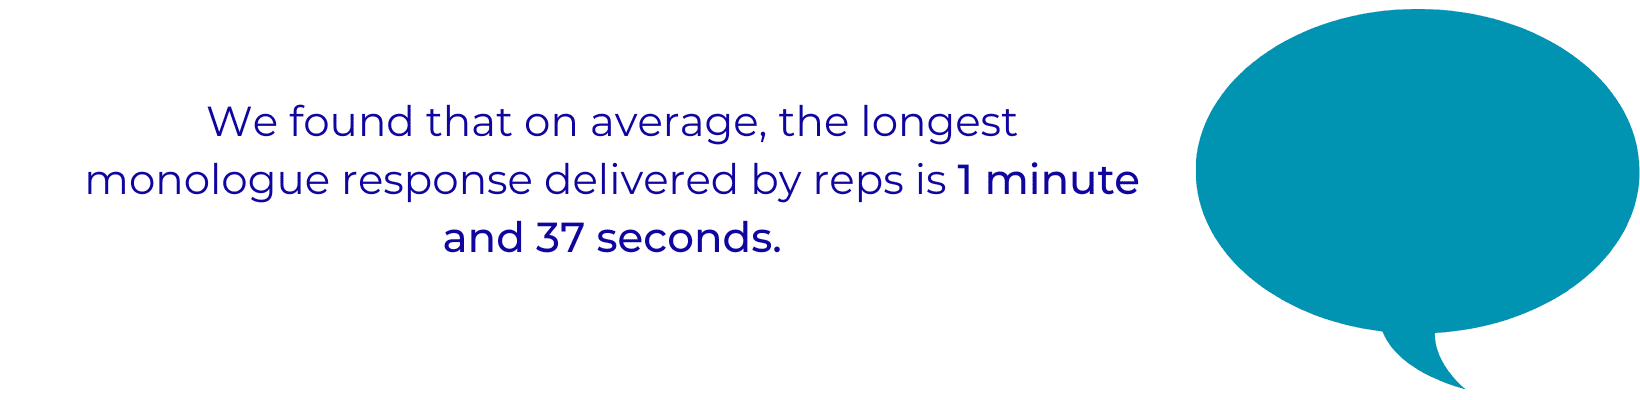 We found that on average, the longest monologue response delivered by reps is 1 minute and 37 seconds.